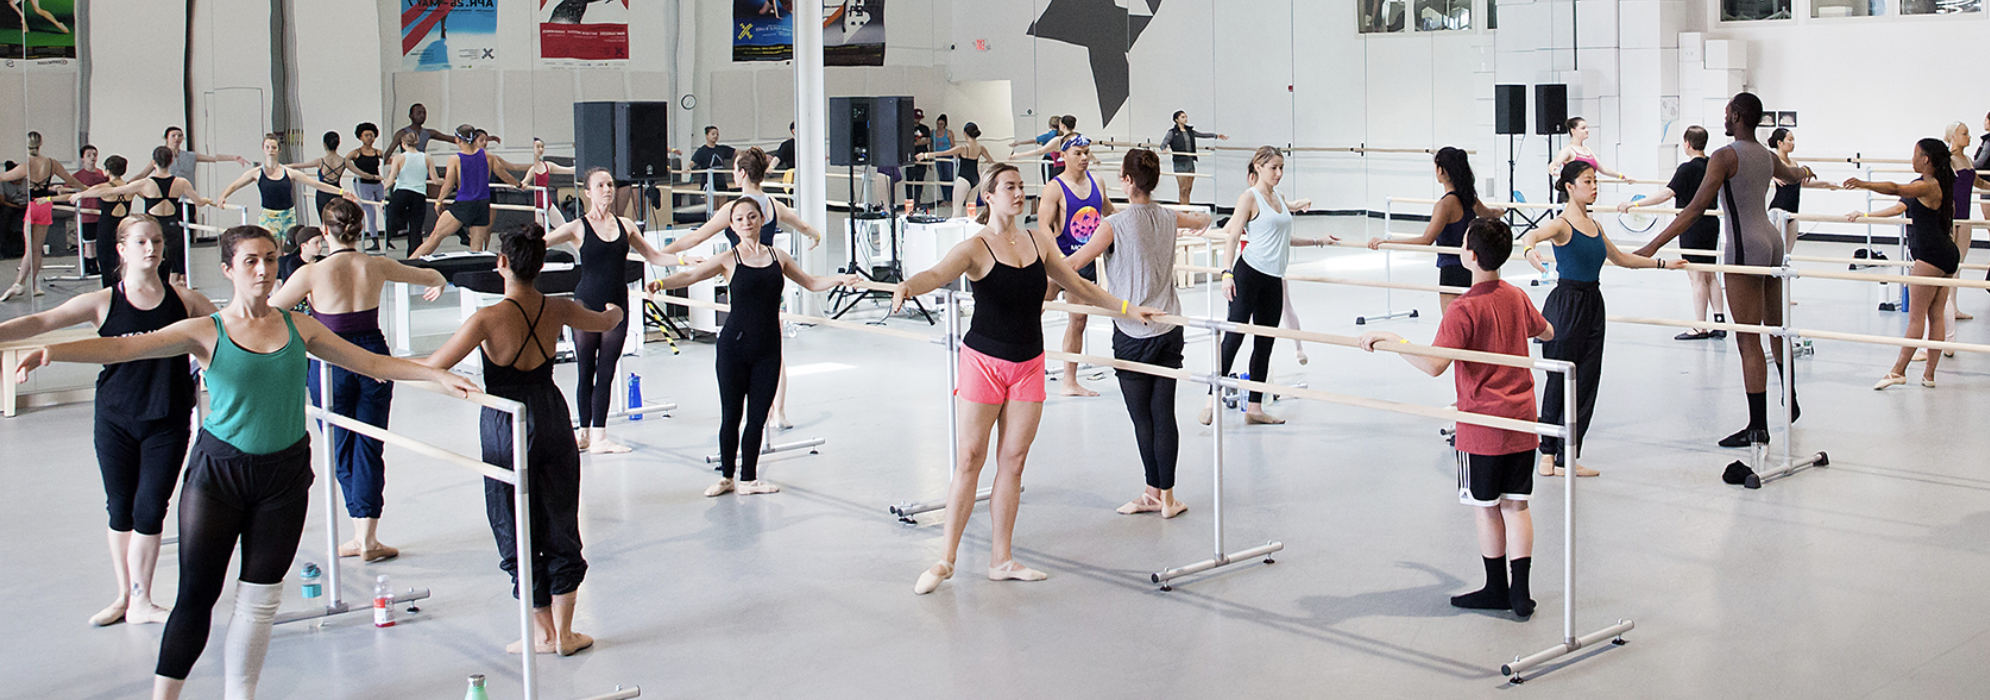 BalletX Barre Fitness with James Ihde